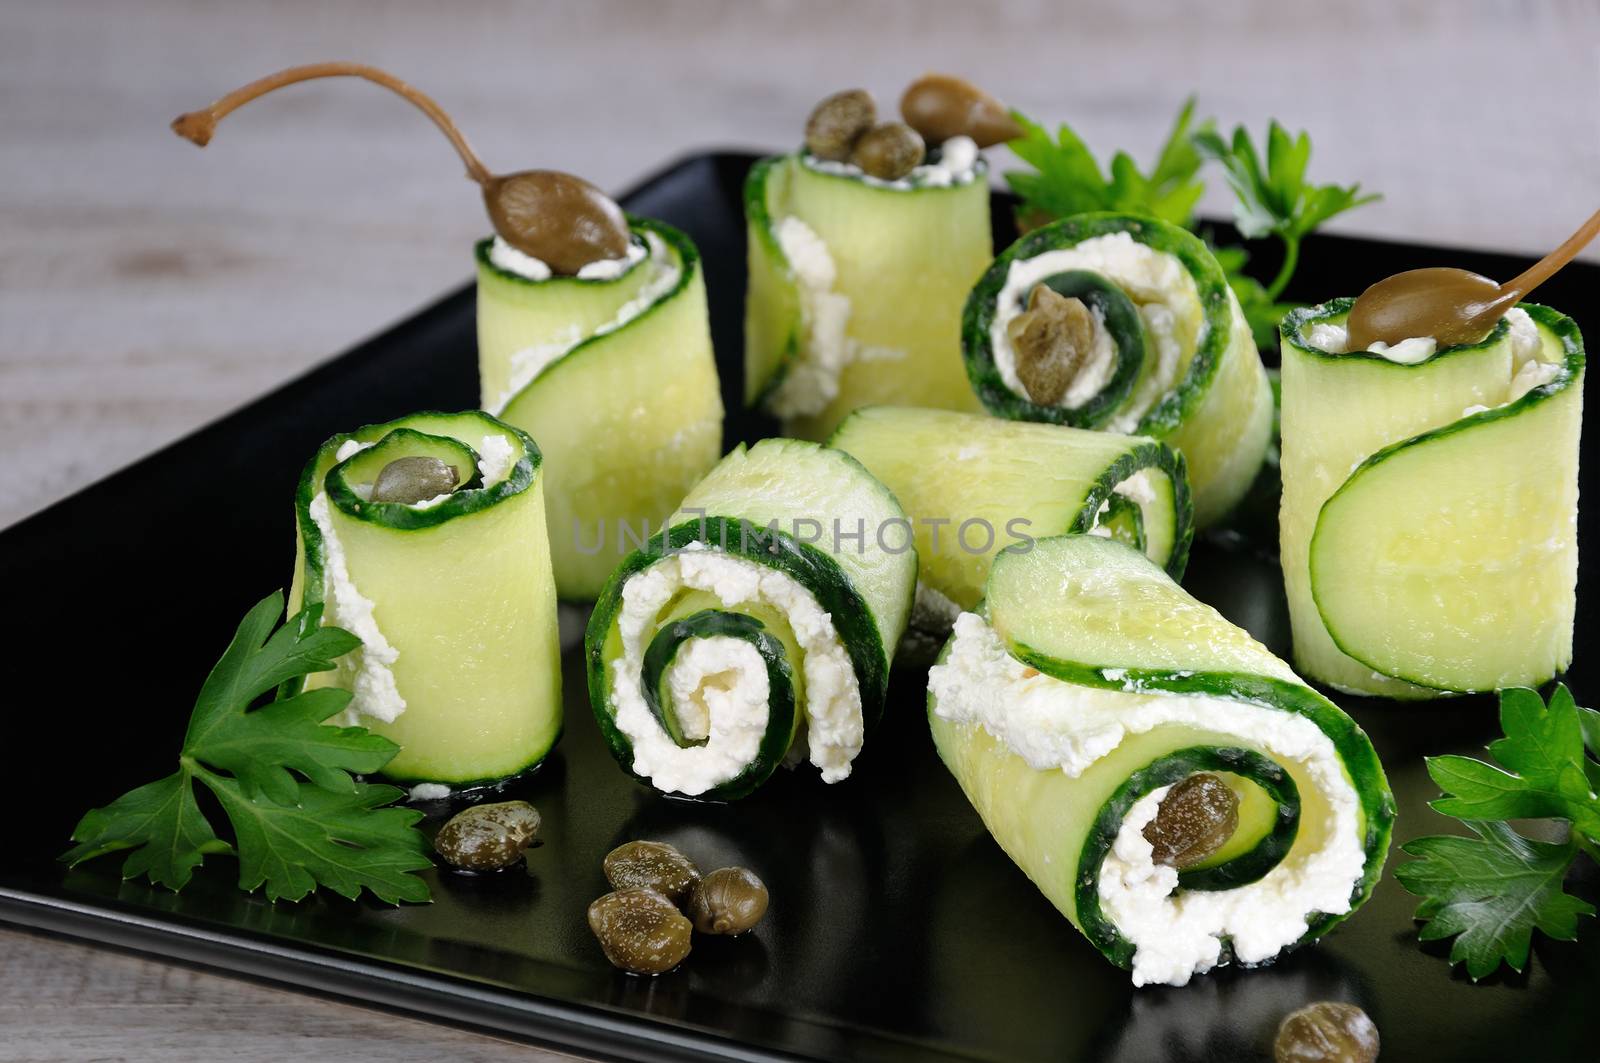 Cucumber rolls by Apolonia